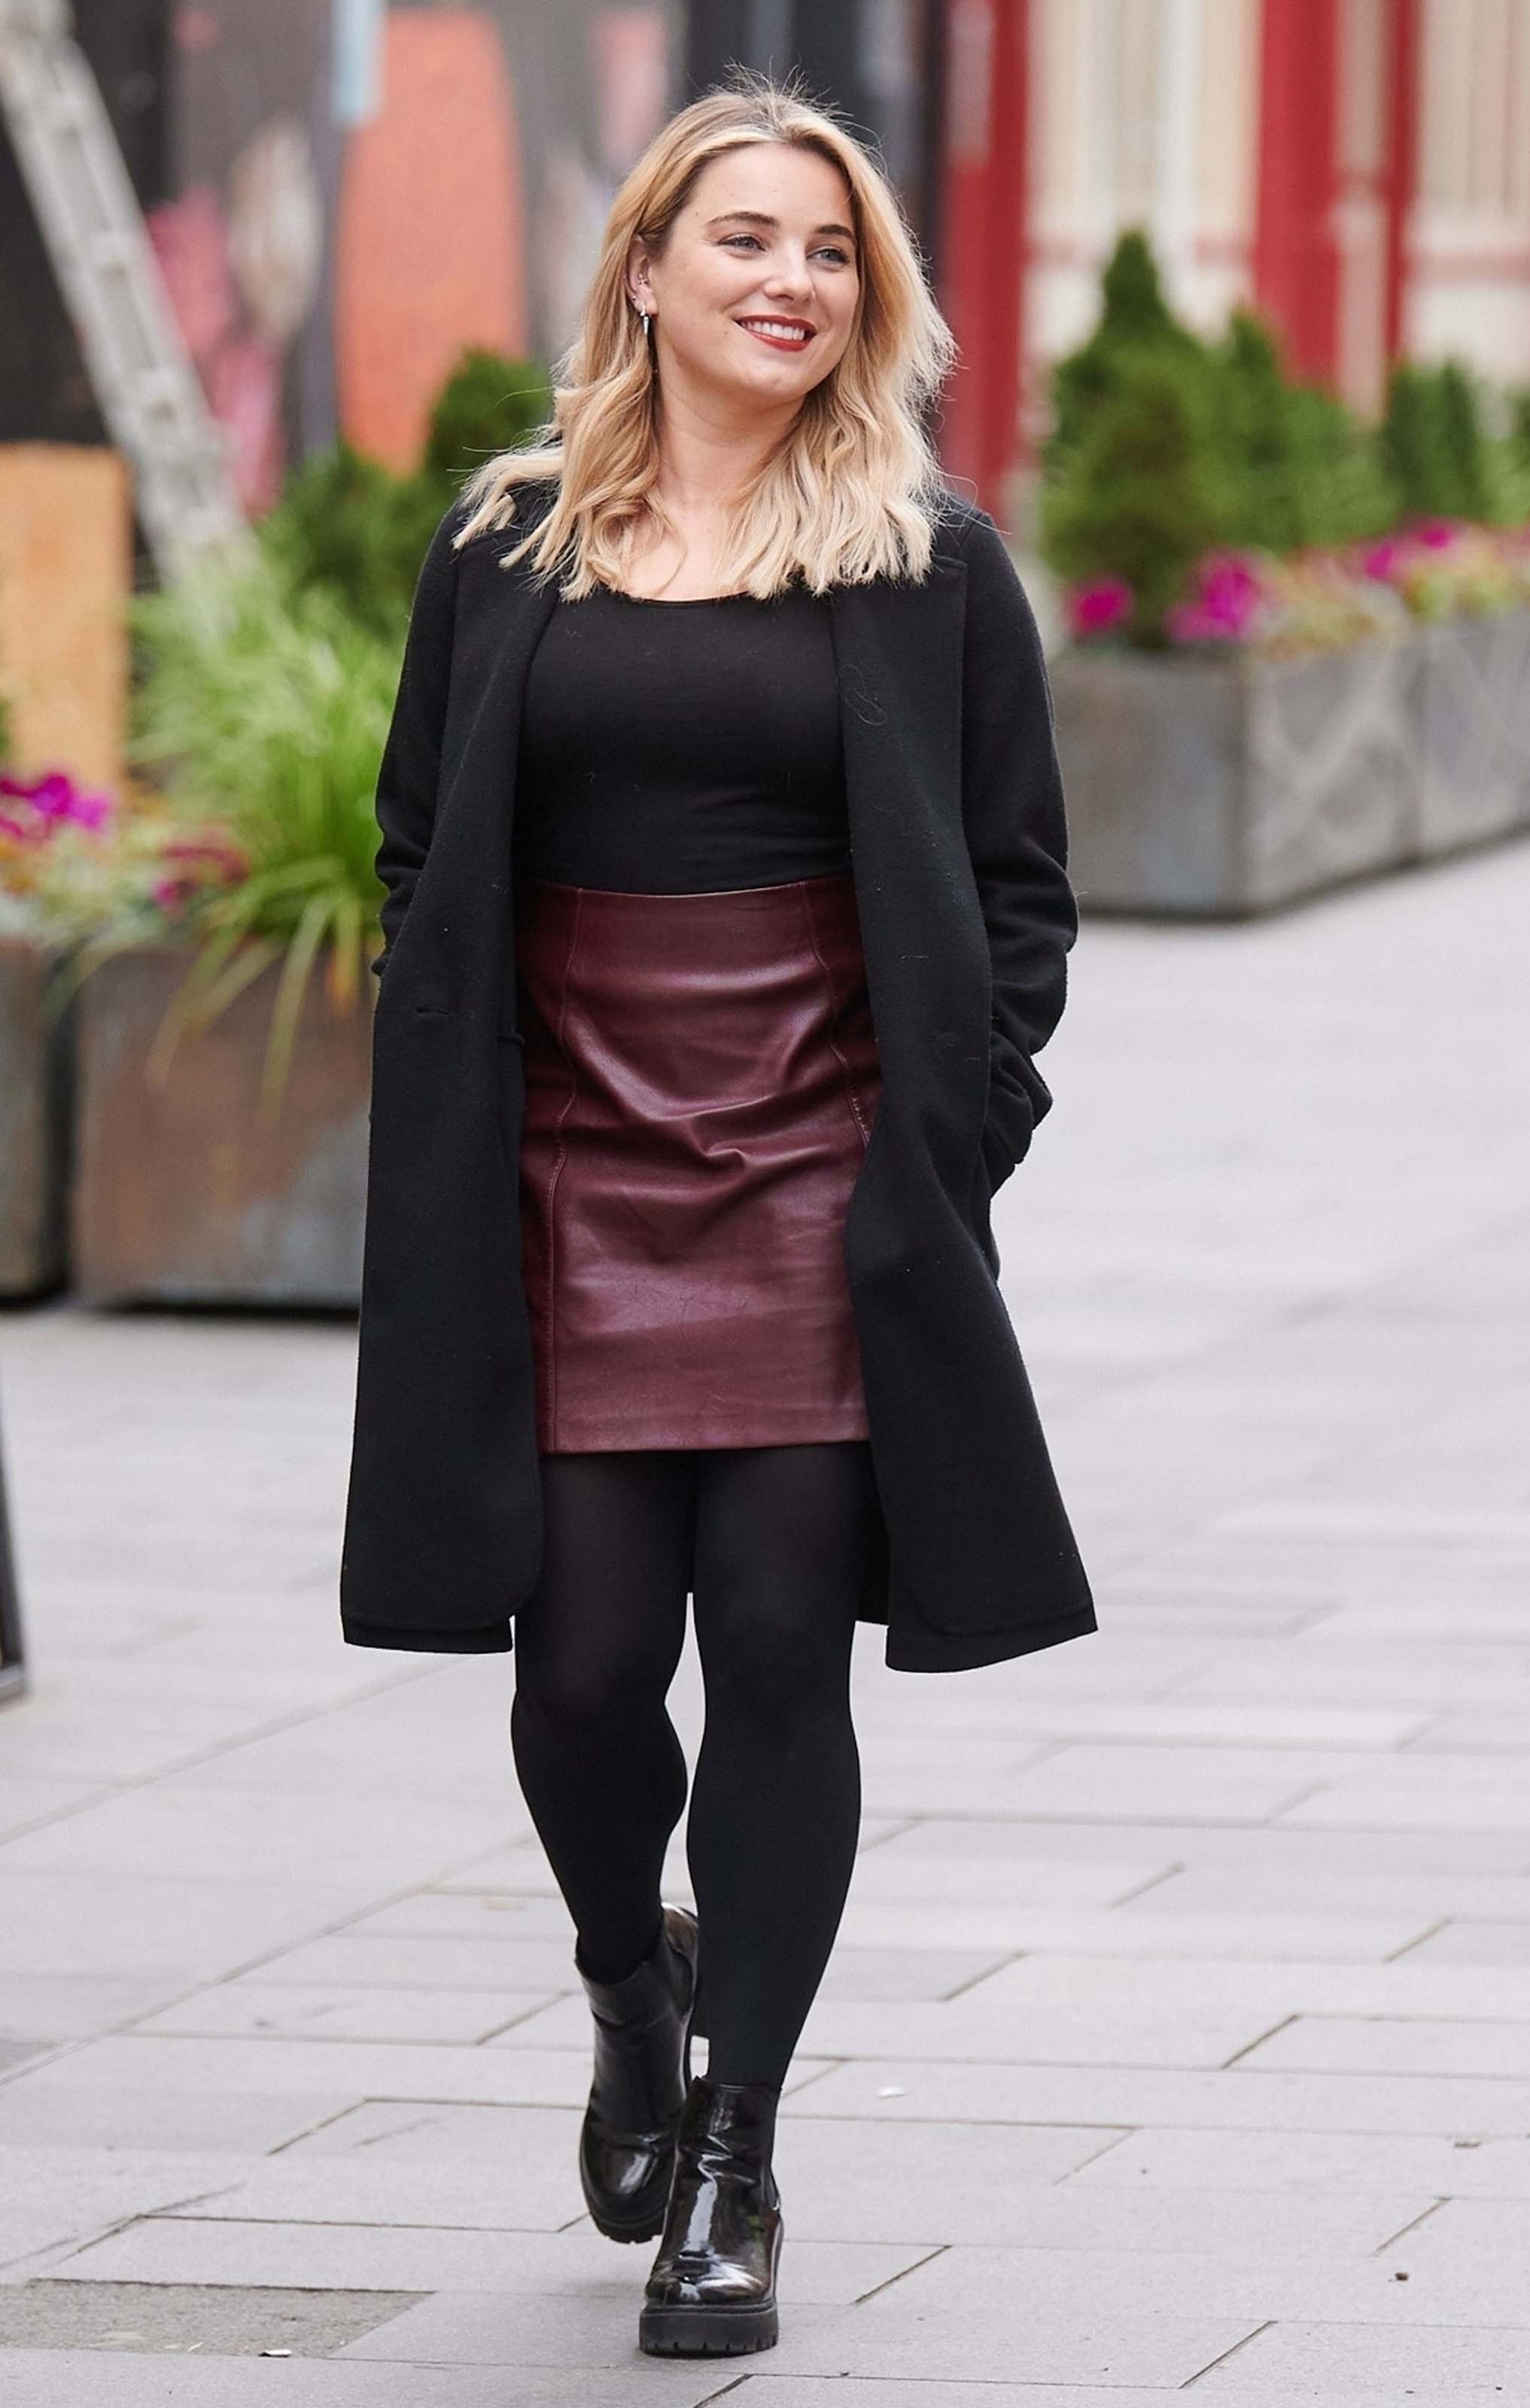 Sian Welby seen at Global Radio Studios in London’s Leicester Square